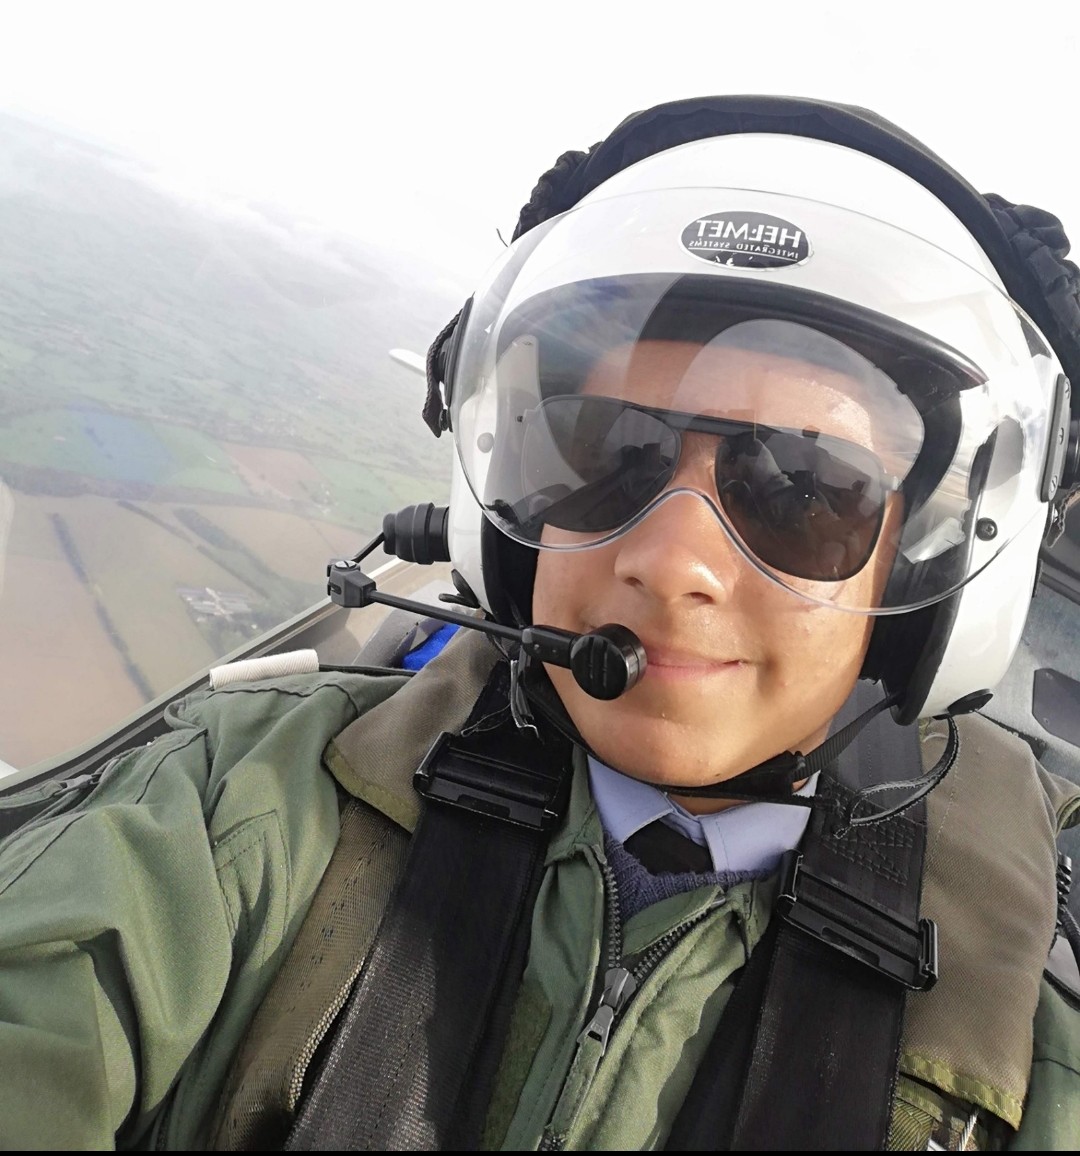 Aslam taking a selfie while flying in the cockpit.